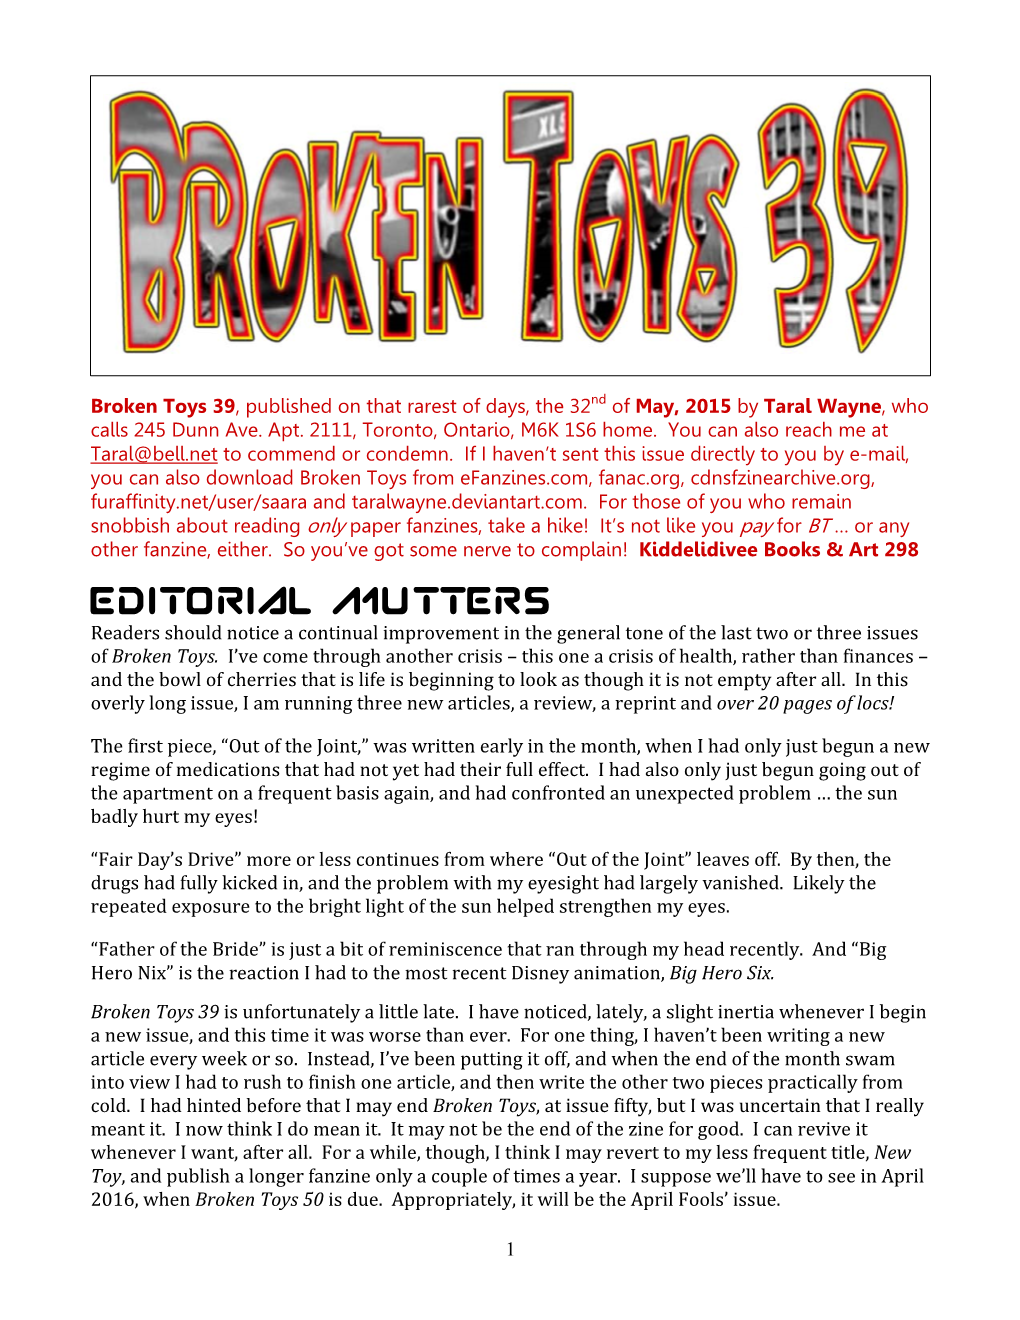 Broken Toys 39, Published on That Rarest of Days, the 32Nd of May, 2015 by Taral Wayne, Who Calls 245 Dunn Ave